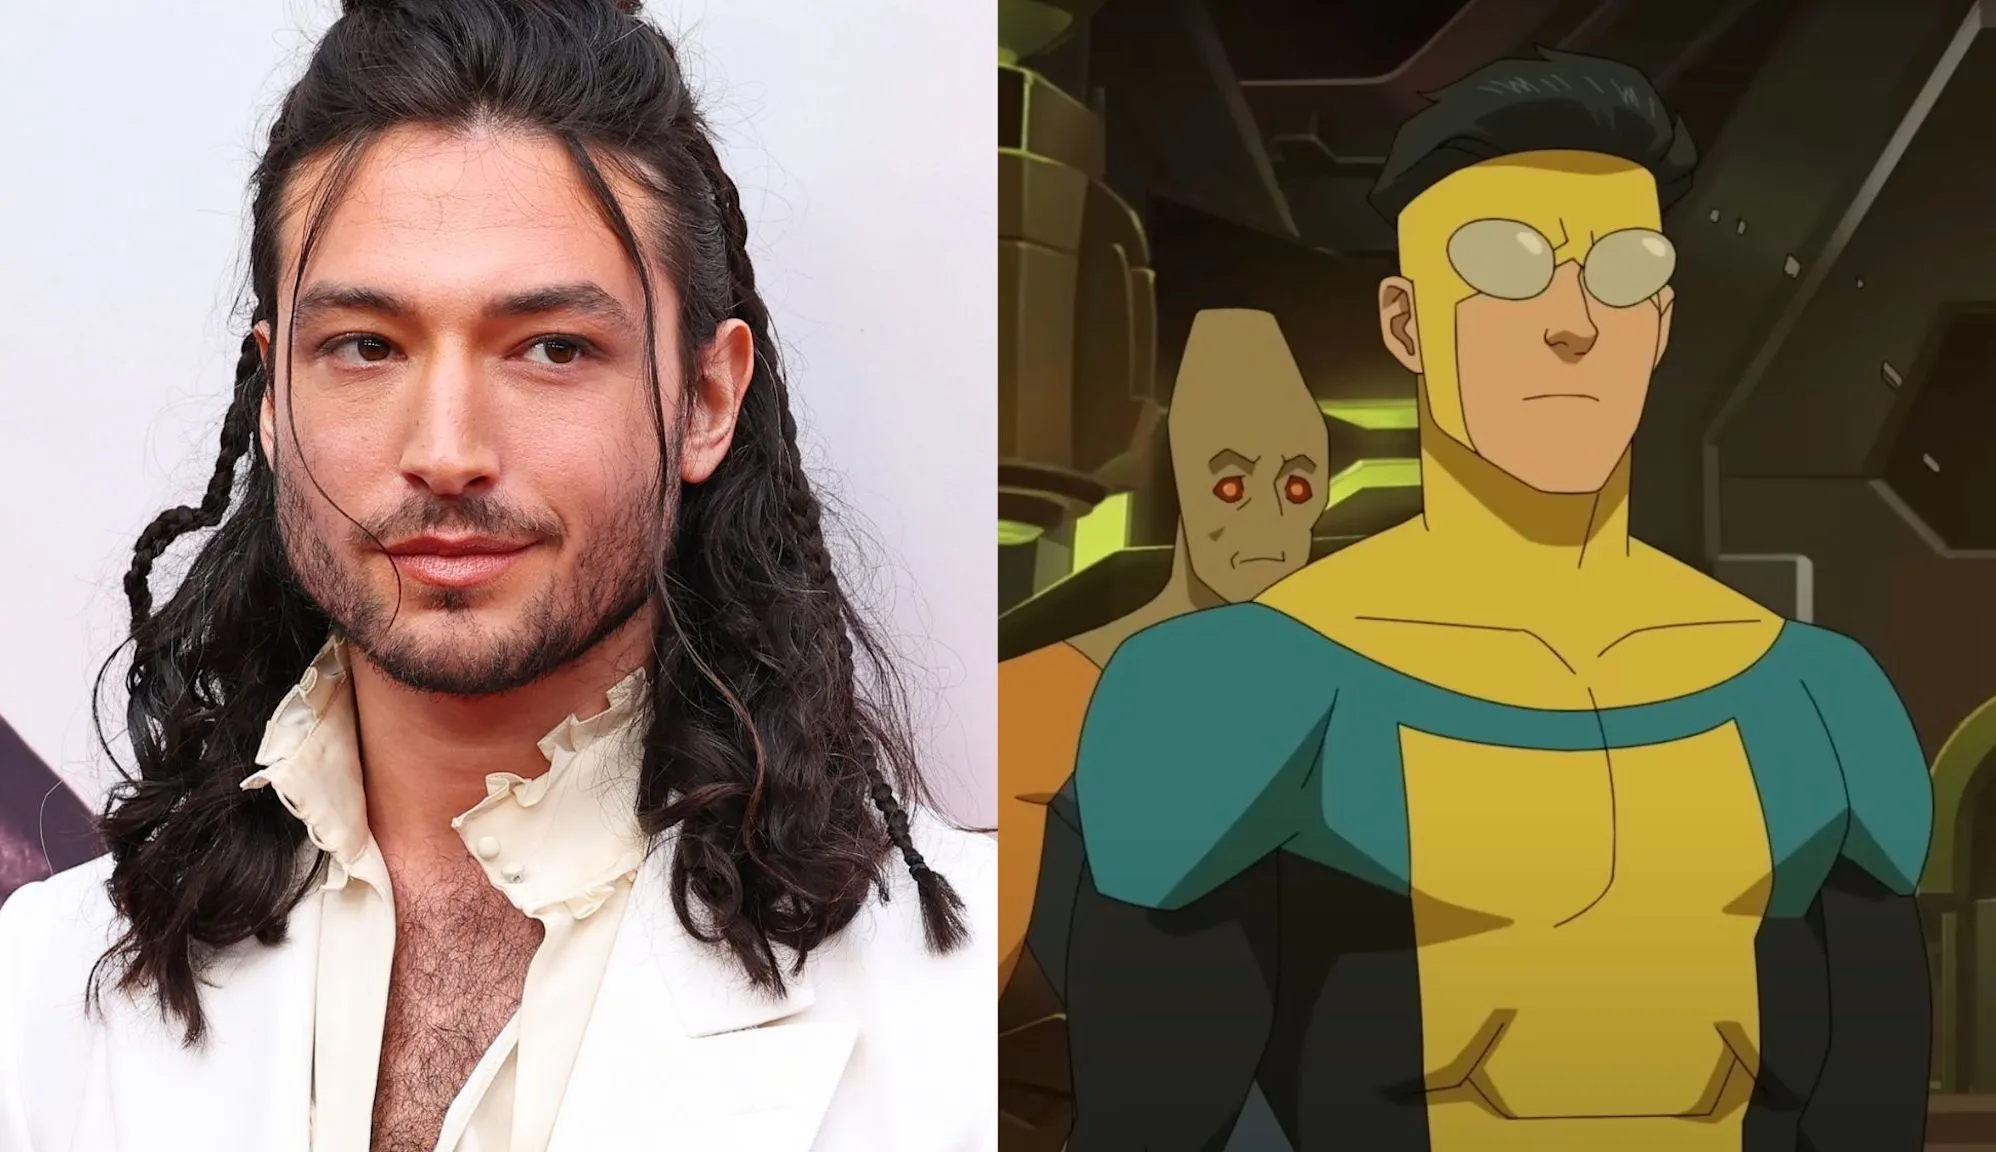 Ezra Miller’s role in Invincible appears to have been recast